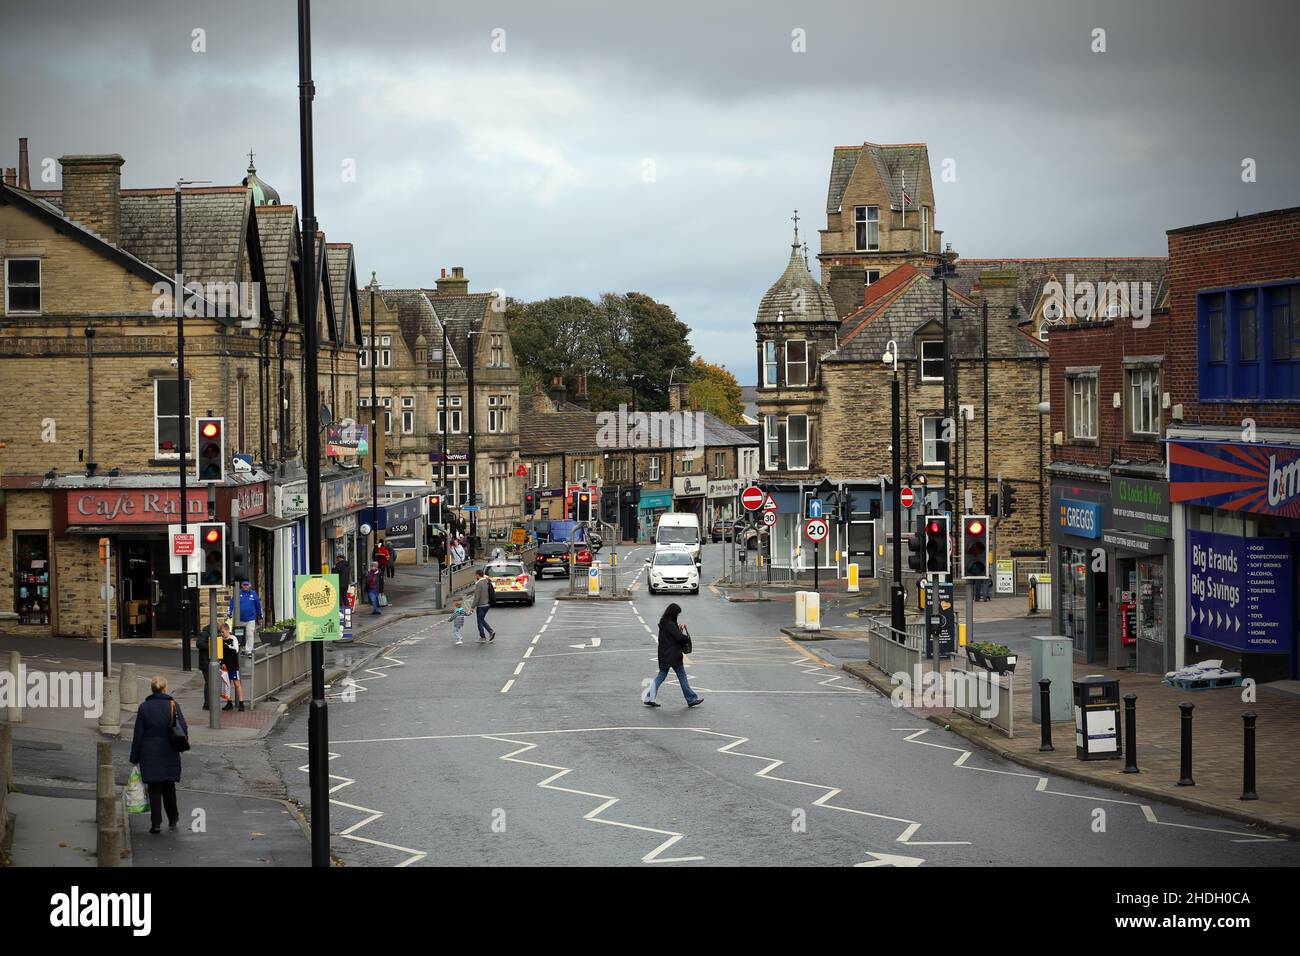 The Market town of Pudsey in West Yorkshire,England. Pudsey is located half way between Bradford city centre and Leeds city centre. Stock Photo